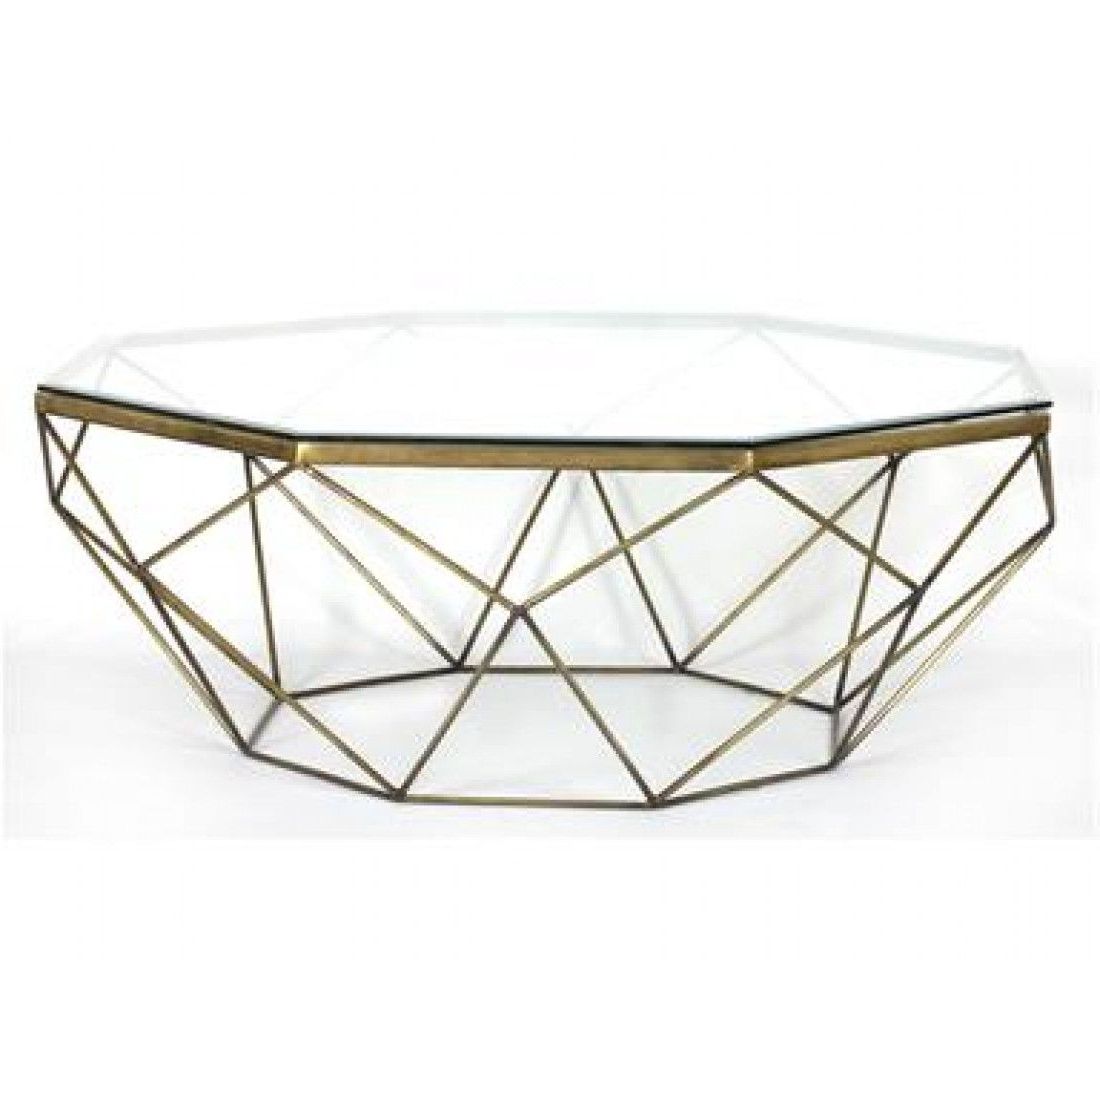 Marlow Geometric Coffee Table Antique Brass (View 16 of 20)